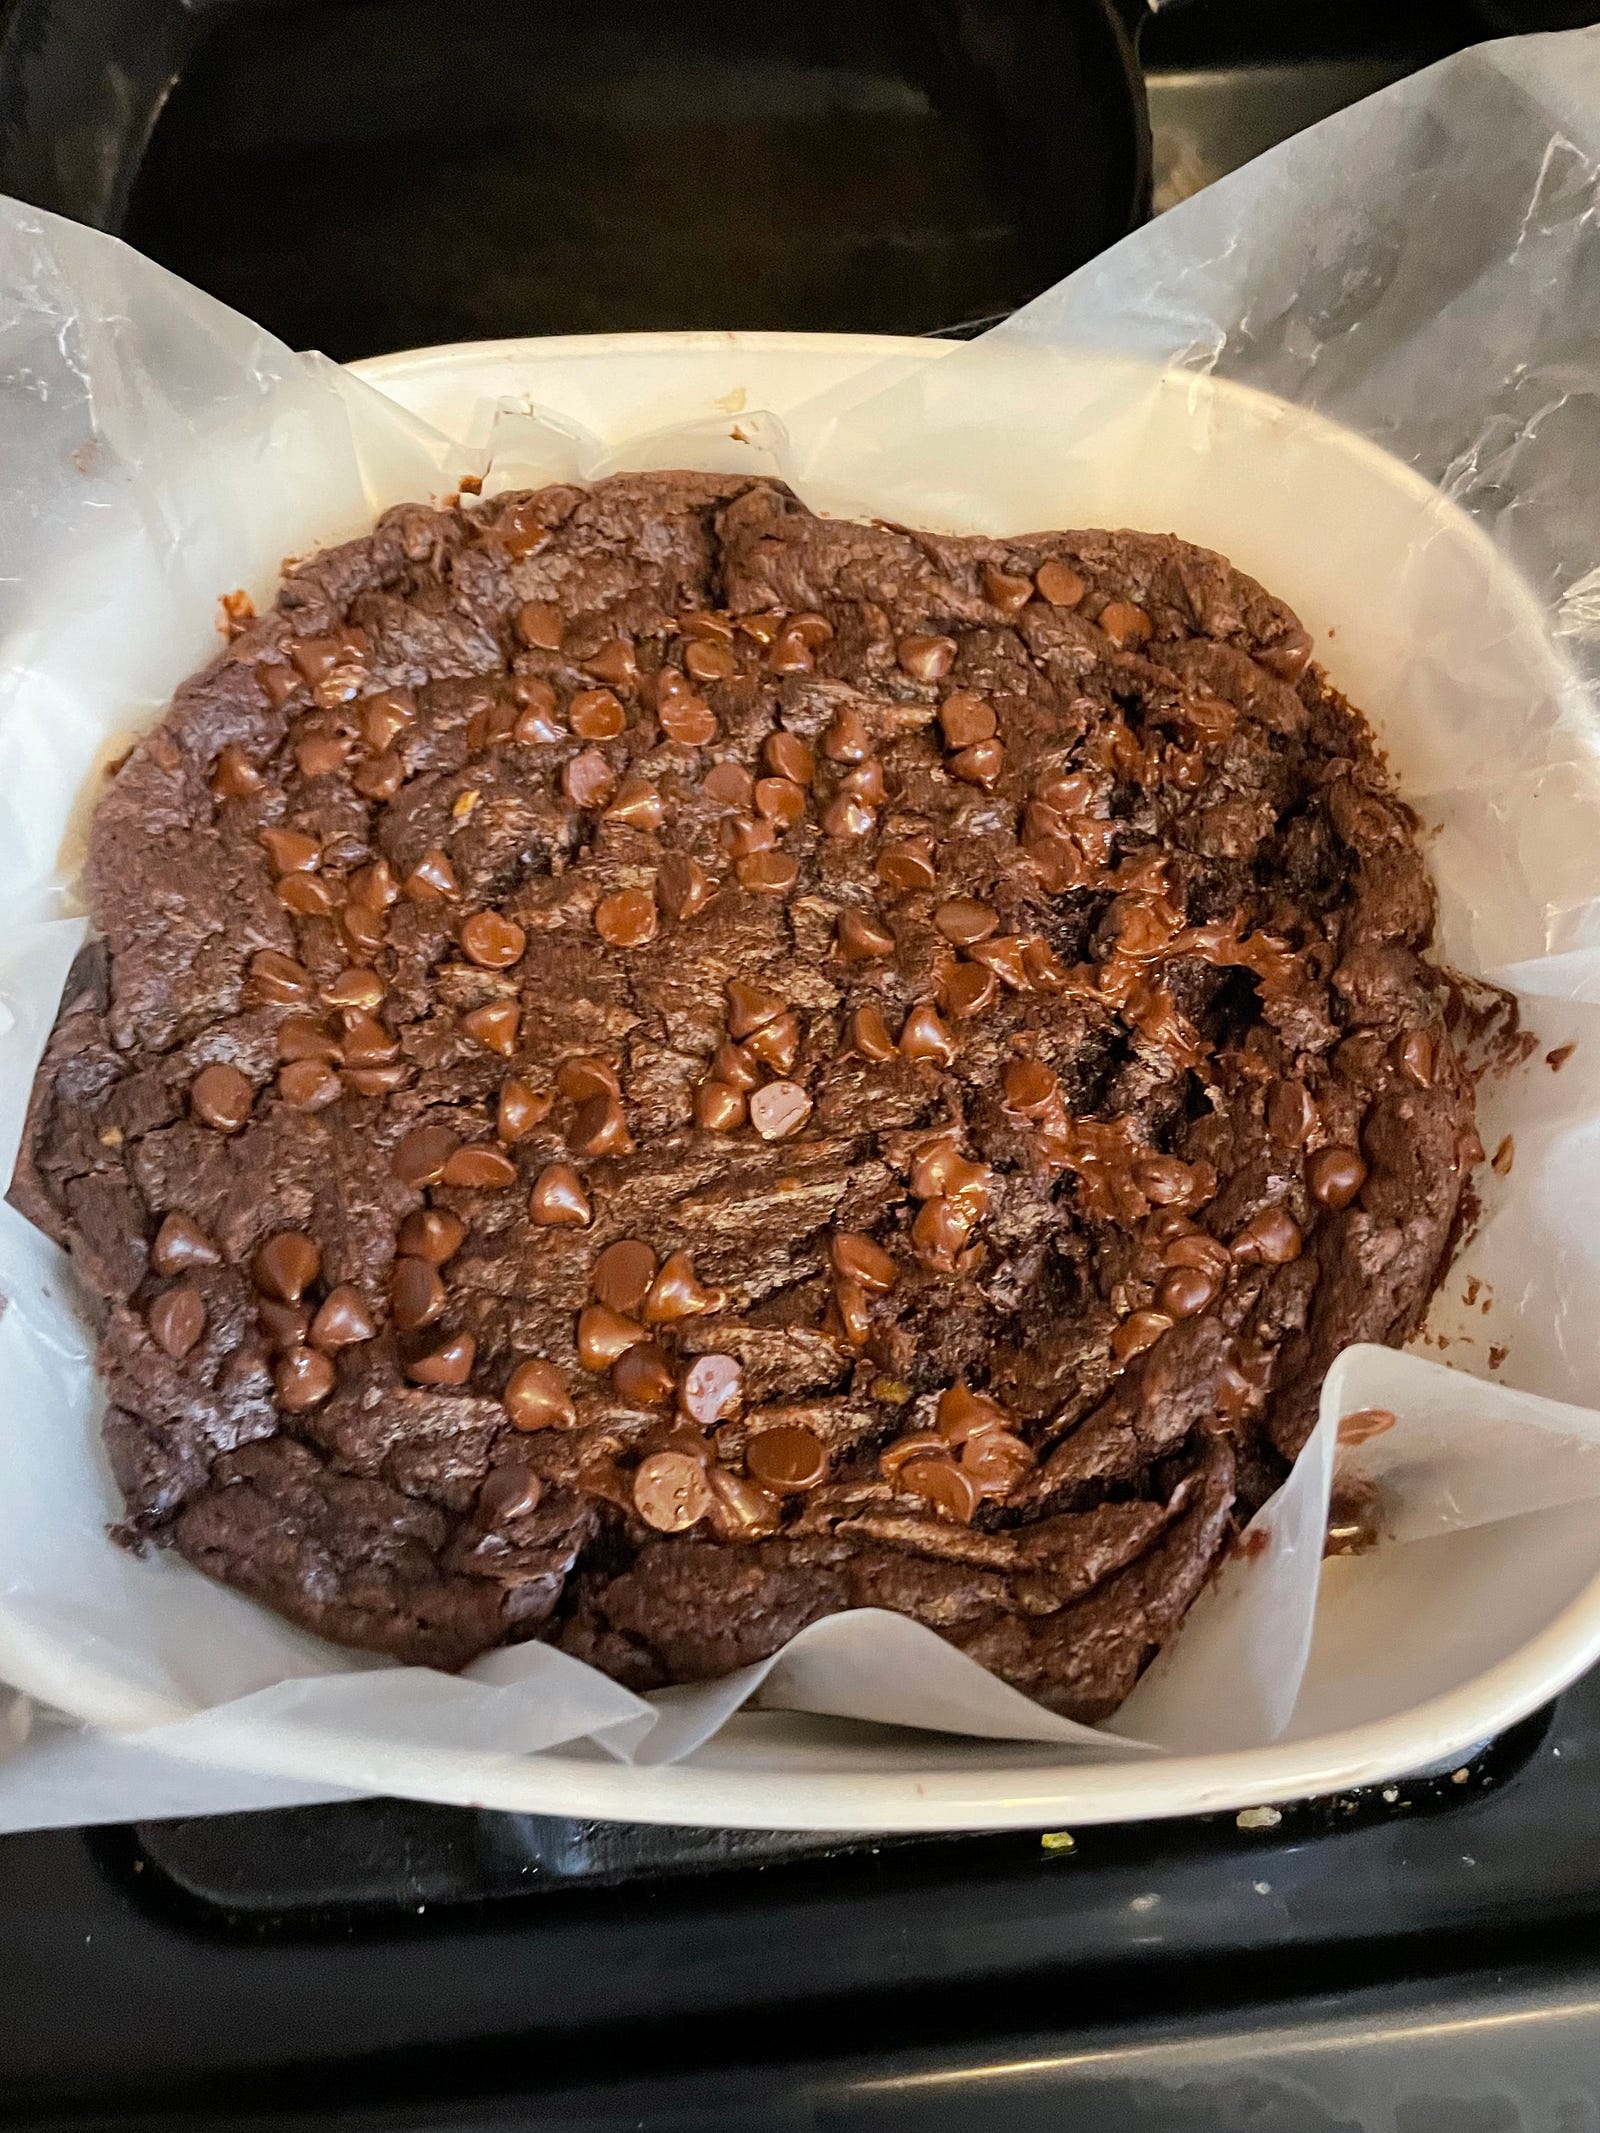 Brownies fresh out of the oven with goowy melting chocolate chips on top, surrounded by wax paper still in the pan.